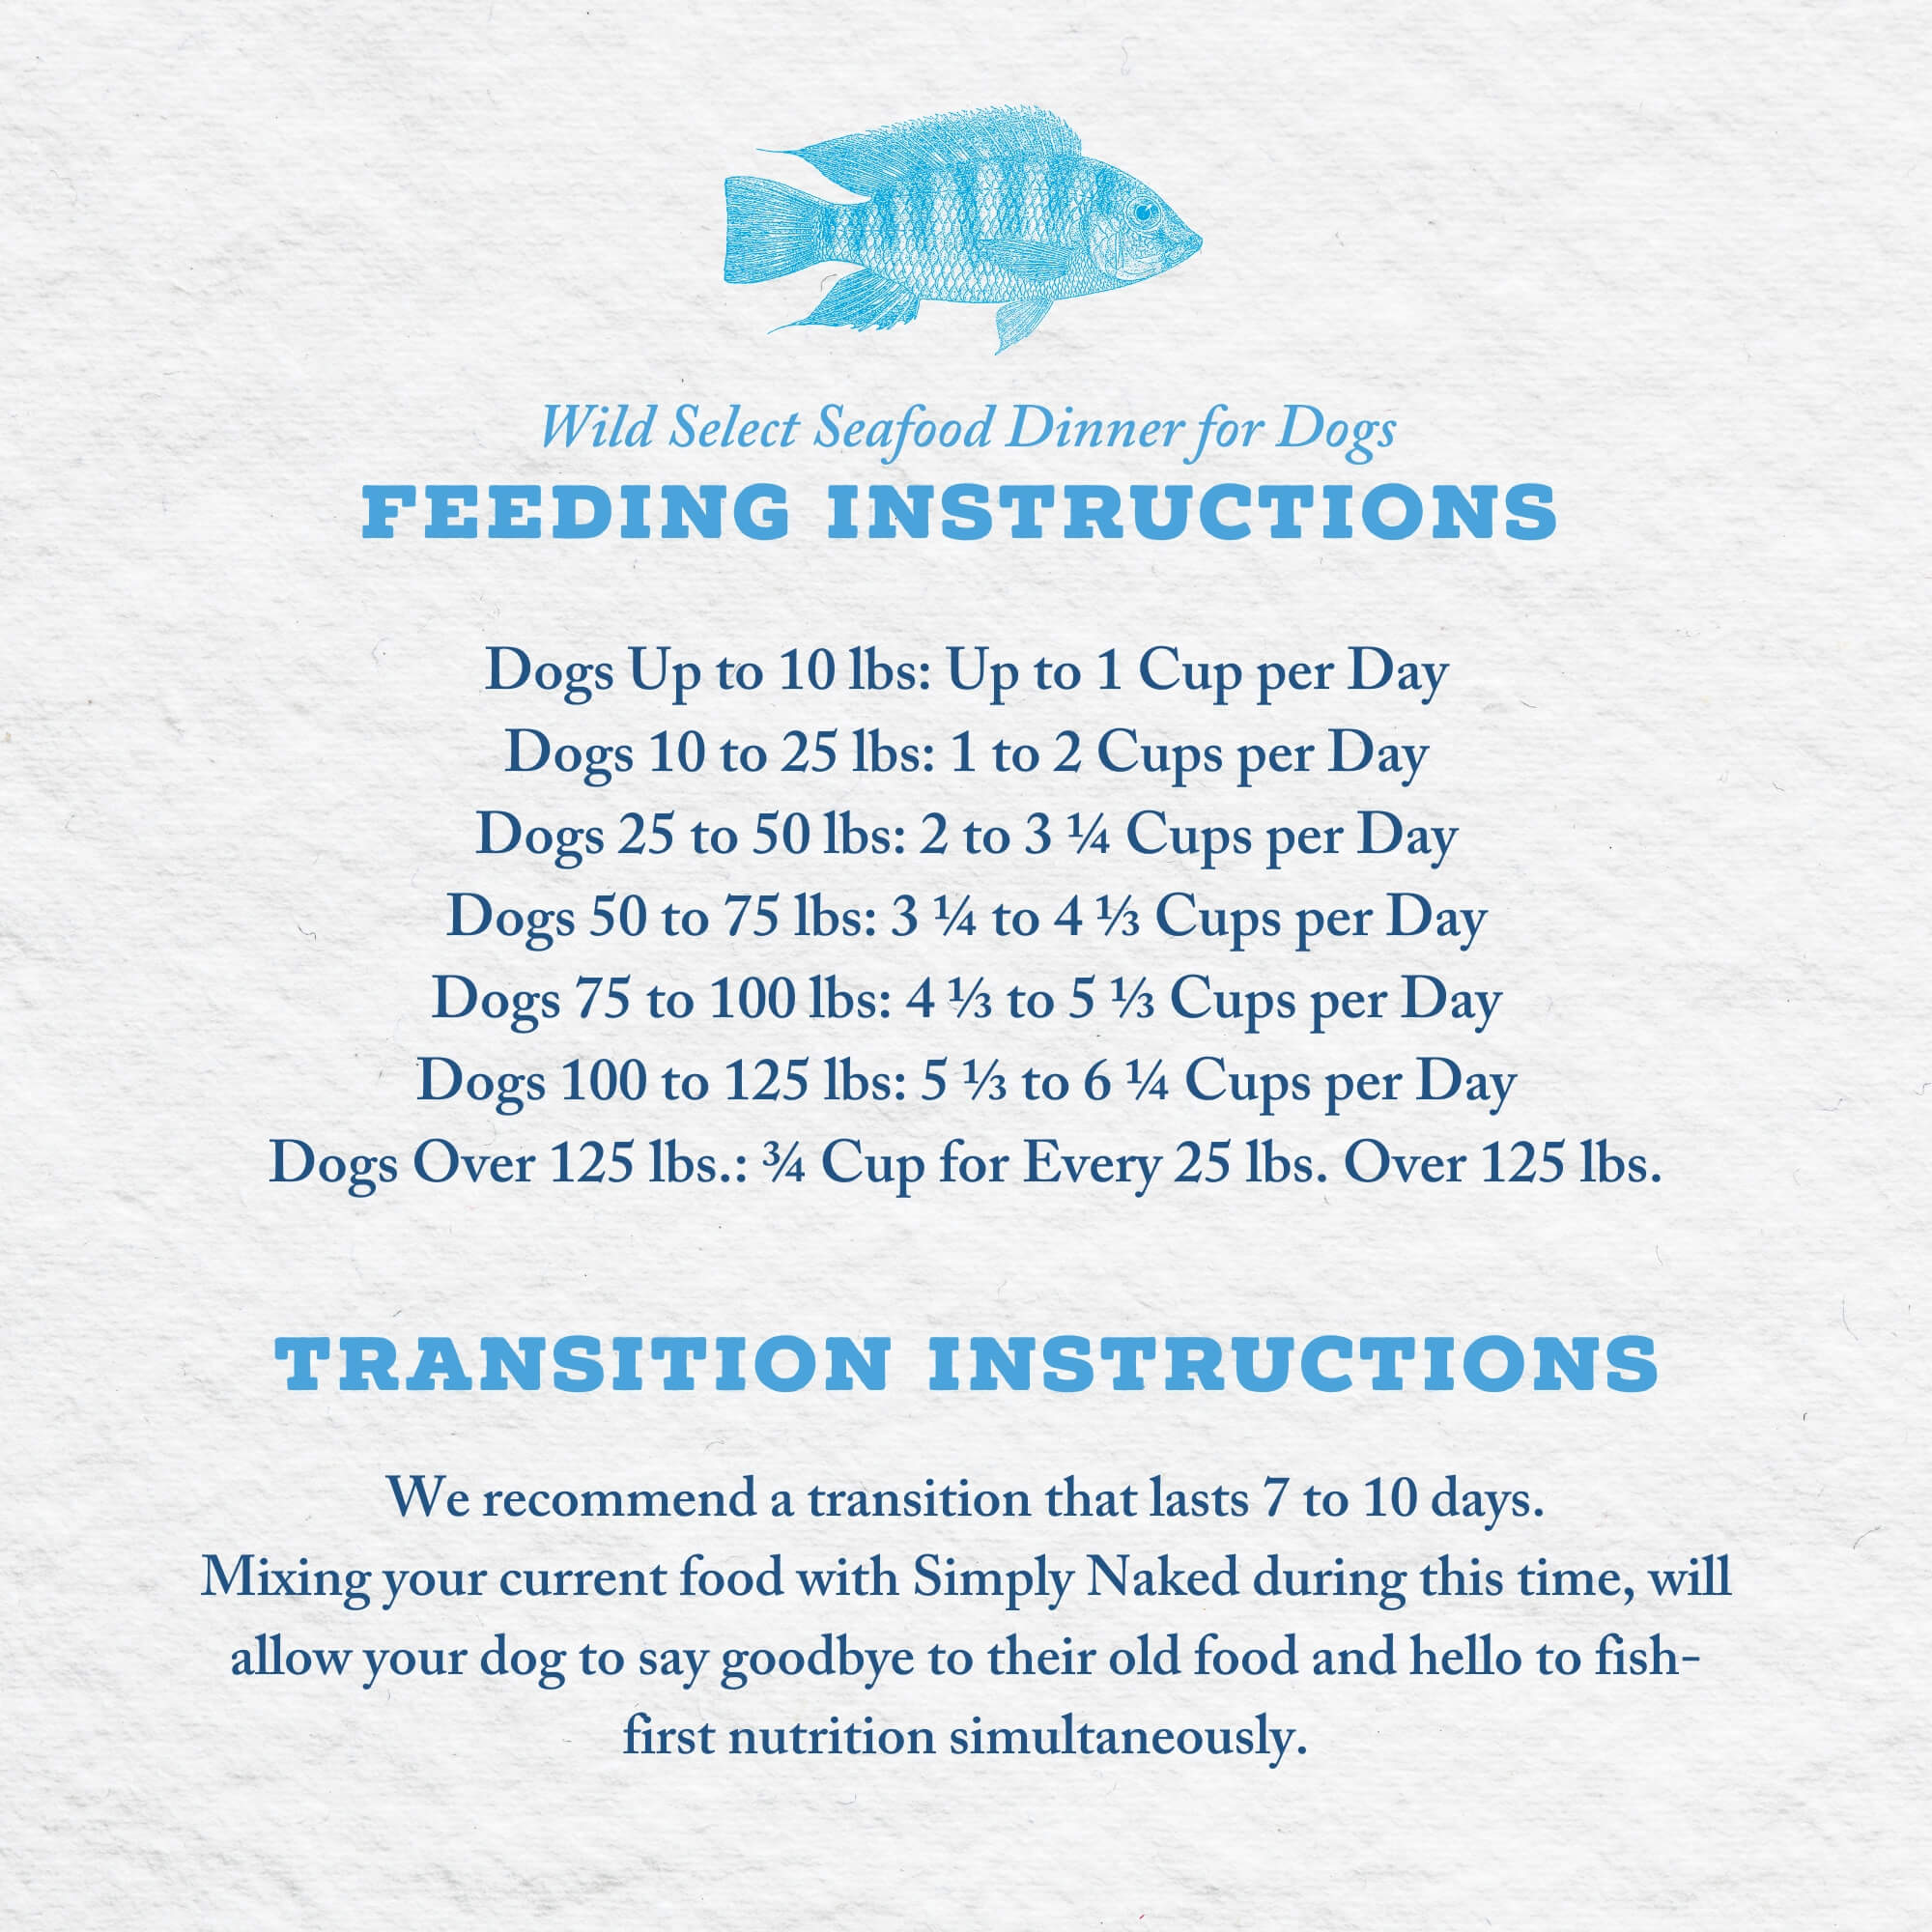 Wild Select Seafood Dinner for Dogs Feeding Instructions